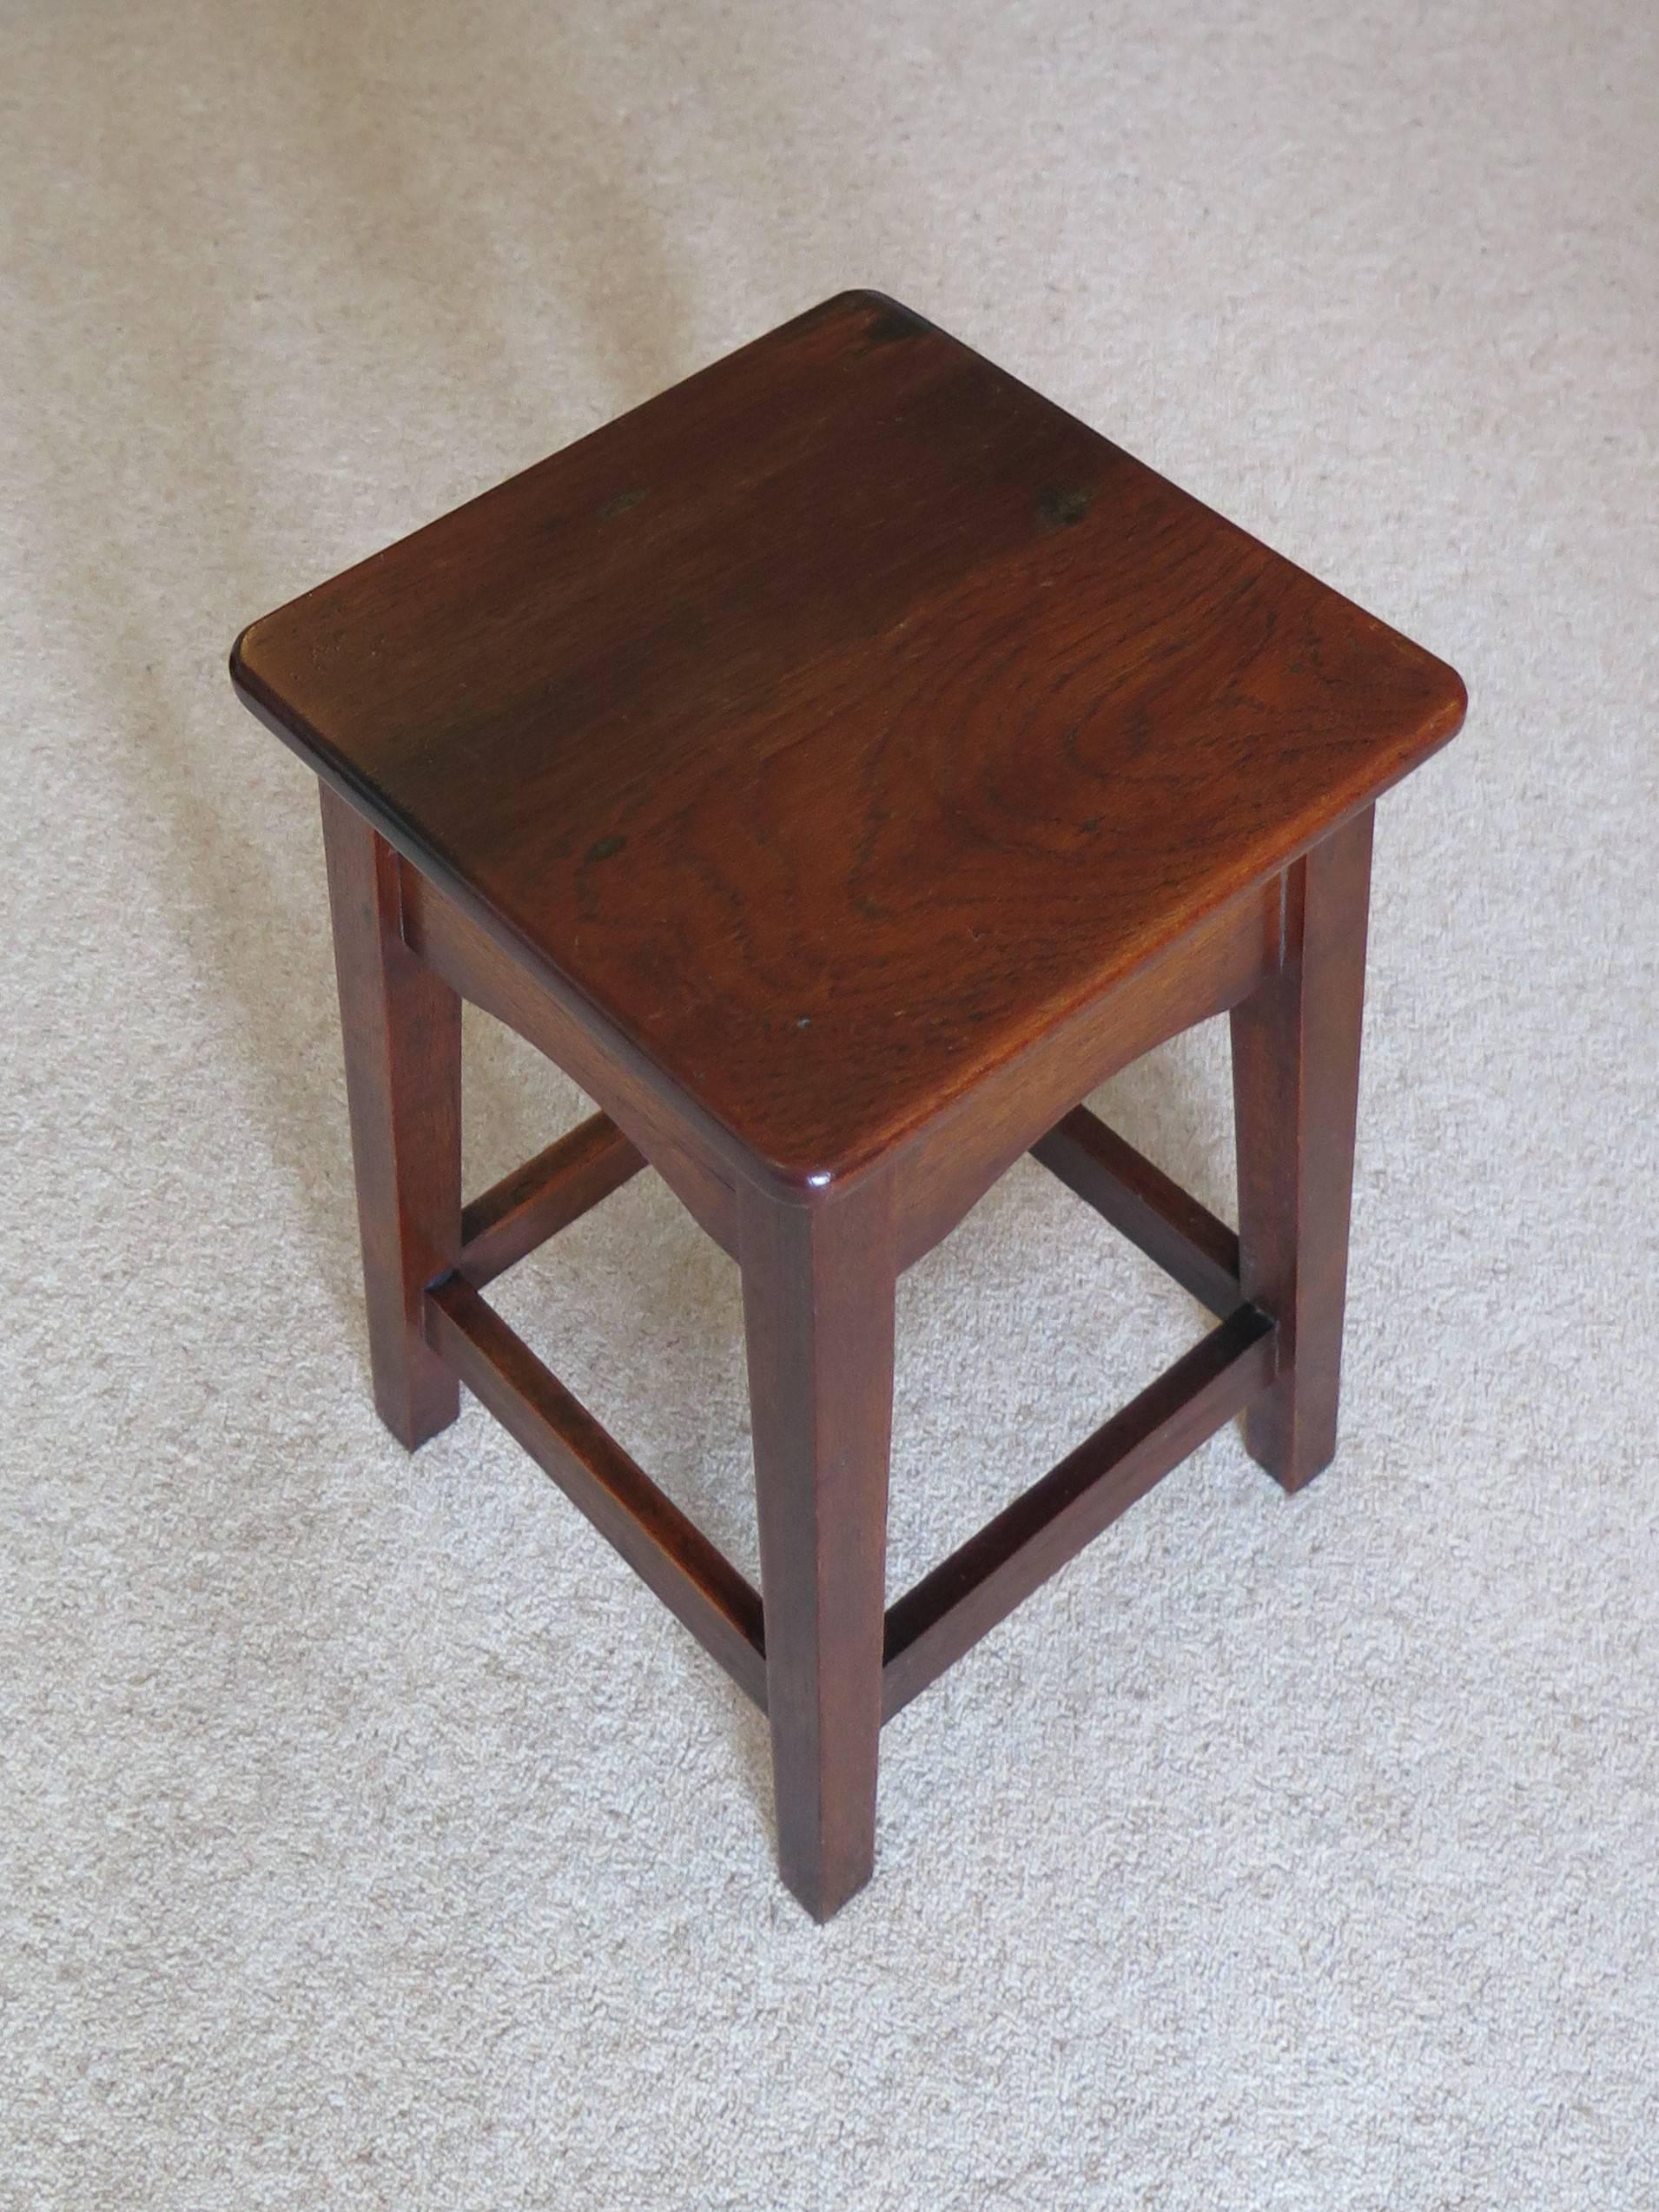 This is a handmade Edwardian solid oak stool with an elm top, which could be used as a stand or a side table.

The top is square with rounded edges and is supported on four square tapered legs with a deep shaped frieze beneath the top. Four lower